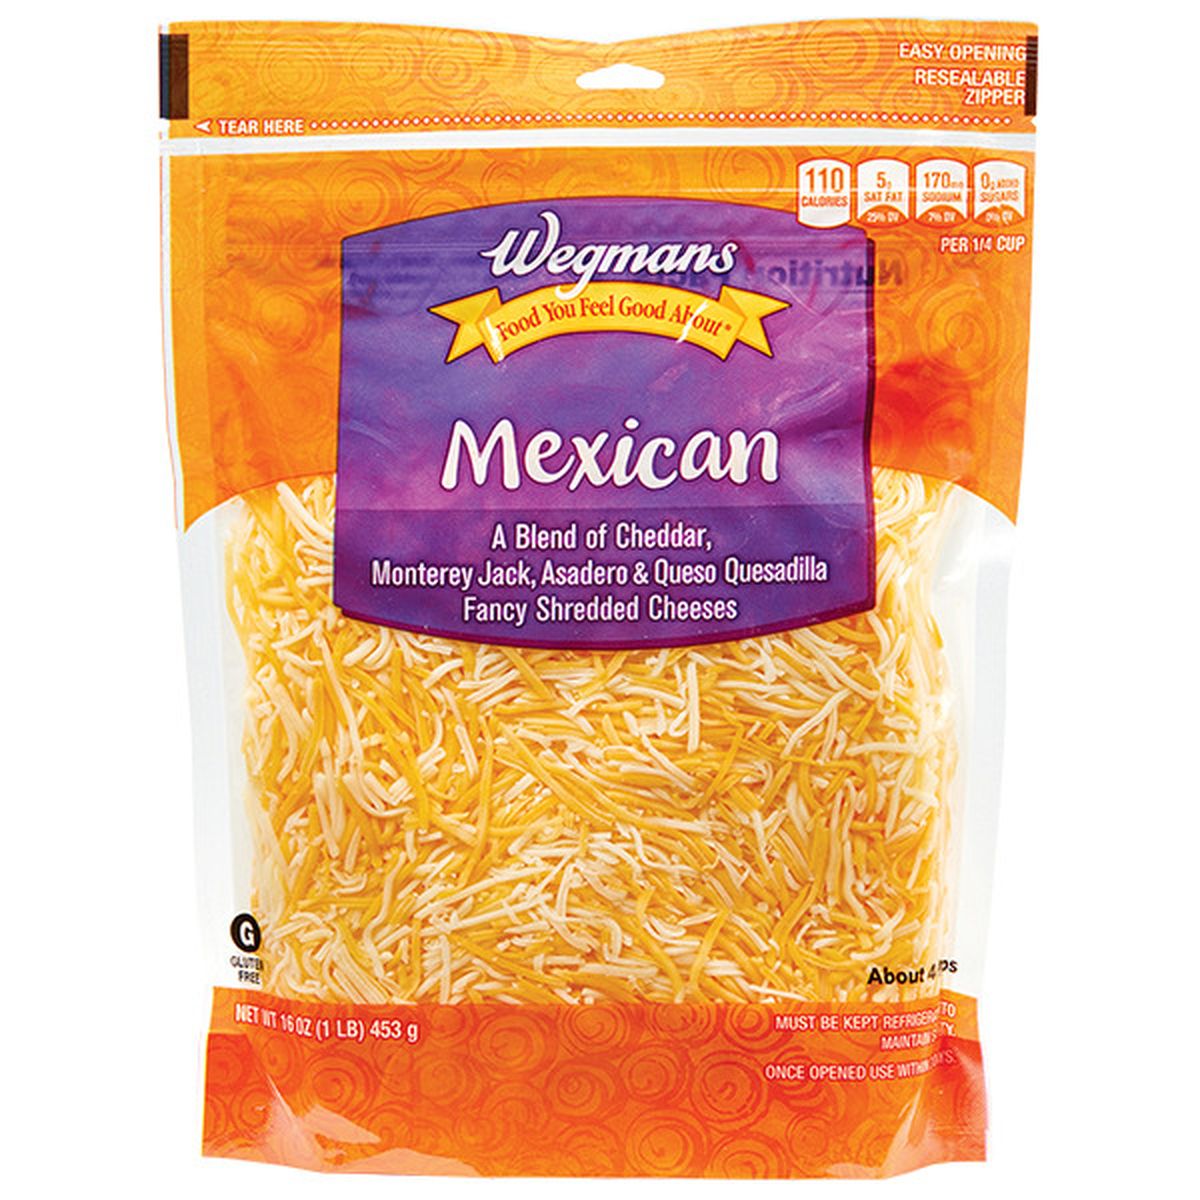 Calories in Wegmans Mexican Fancy Shredded Cheese